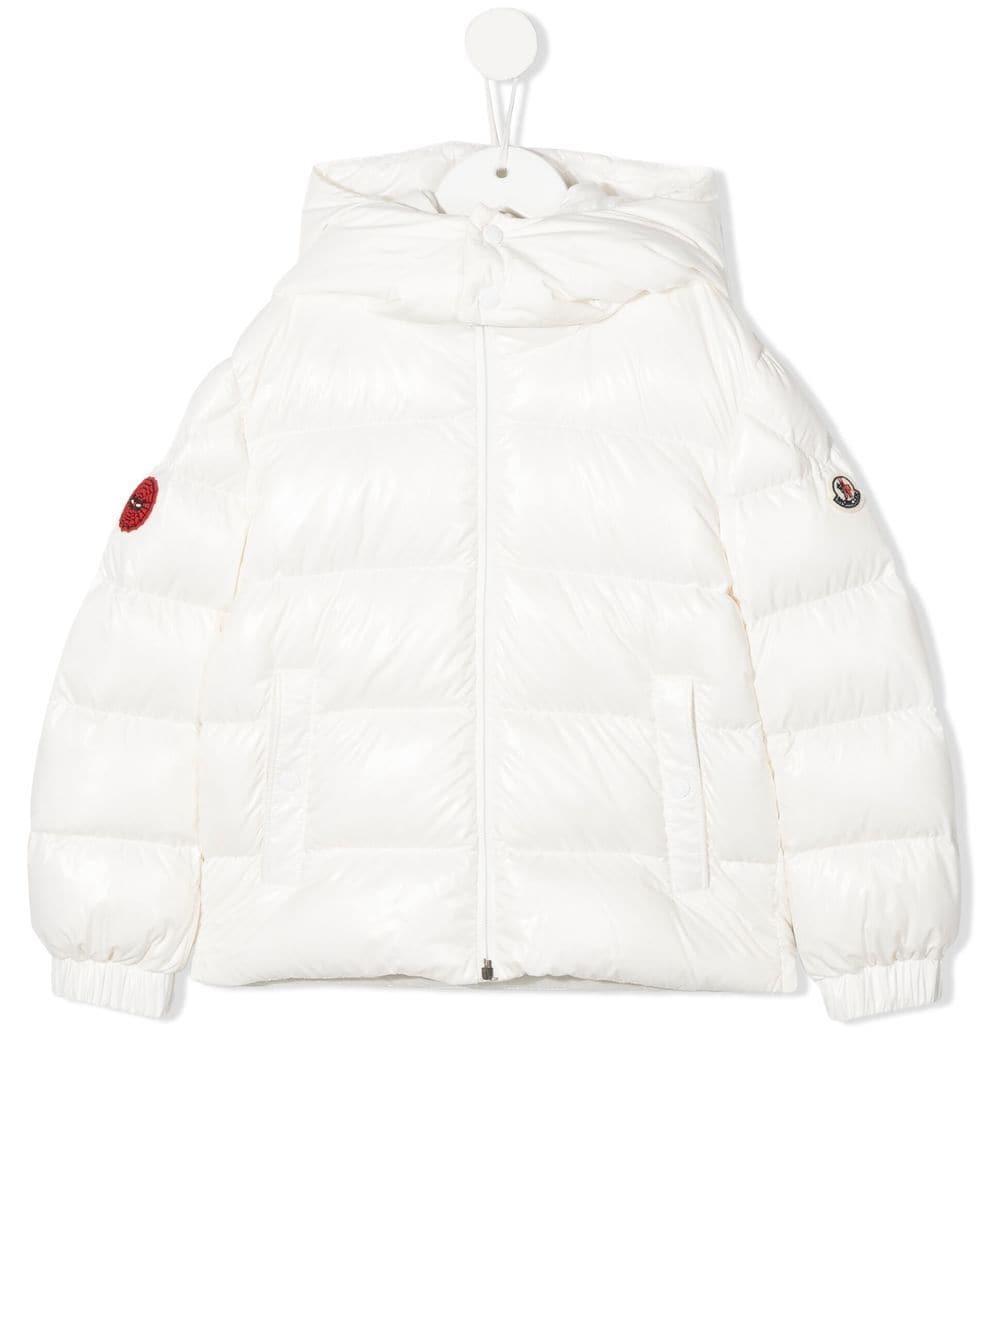 Moncler Narzin Spider-man Jacket in White for Men | Lyst Canada